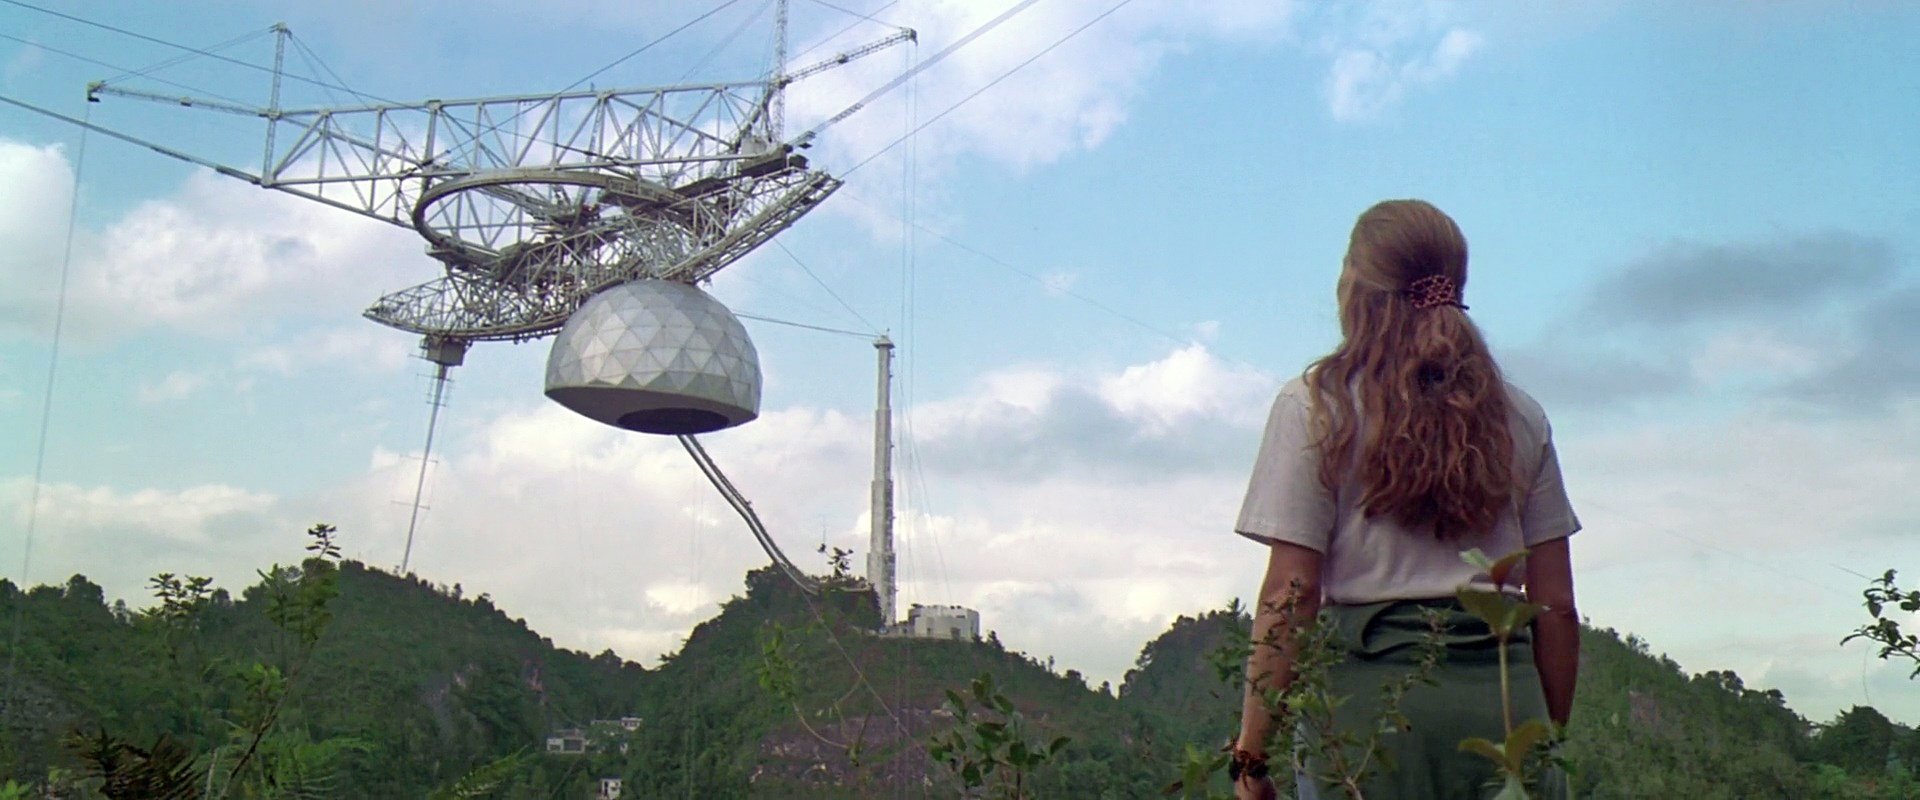 A screenshot from the movie Contact (1997), showing Jodie Foster staring up at Arecibo's Gregorian dome.